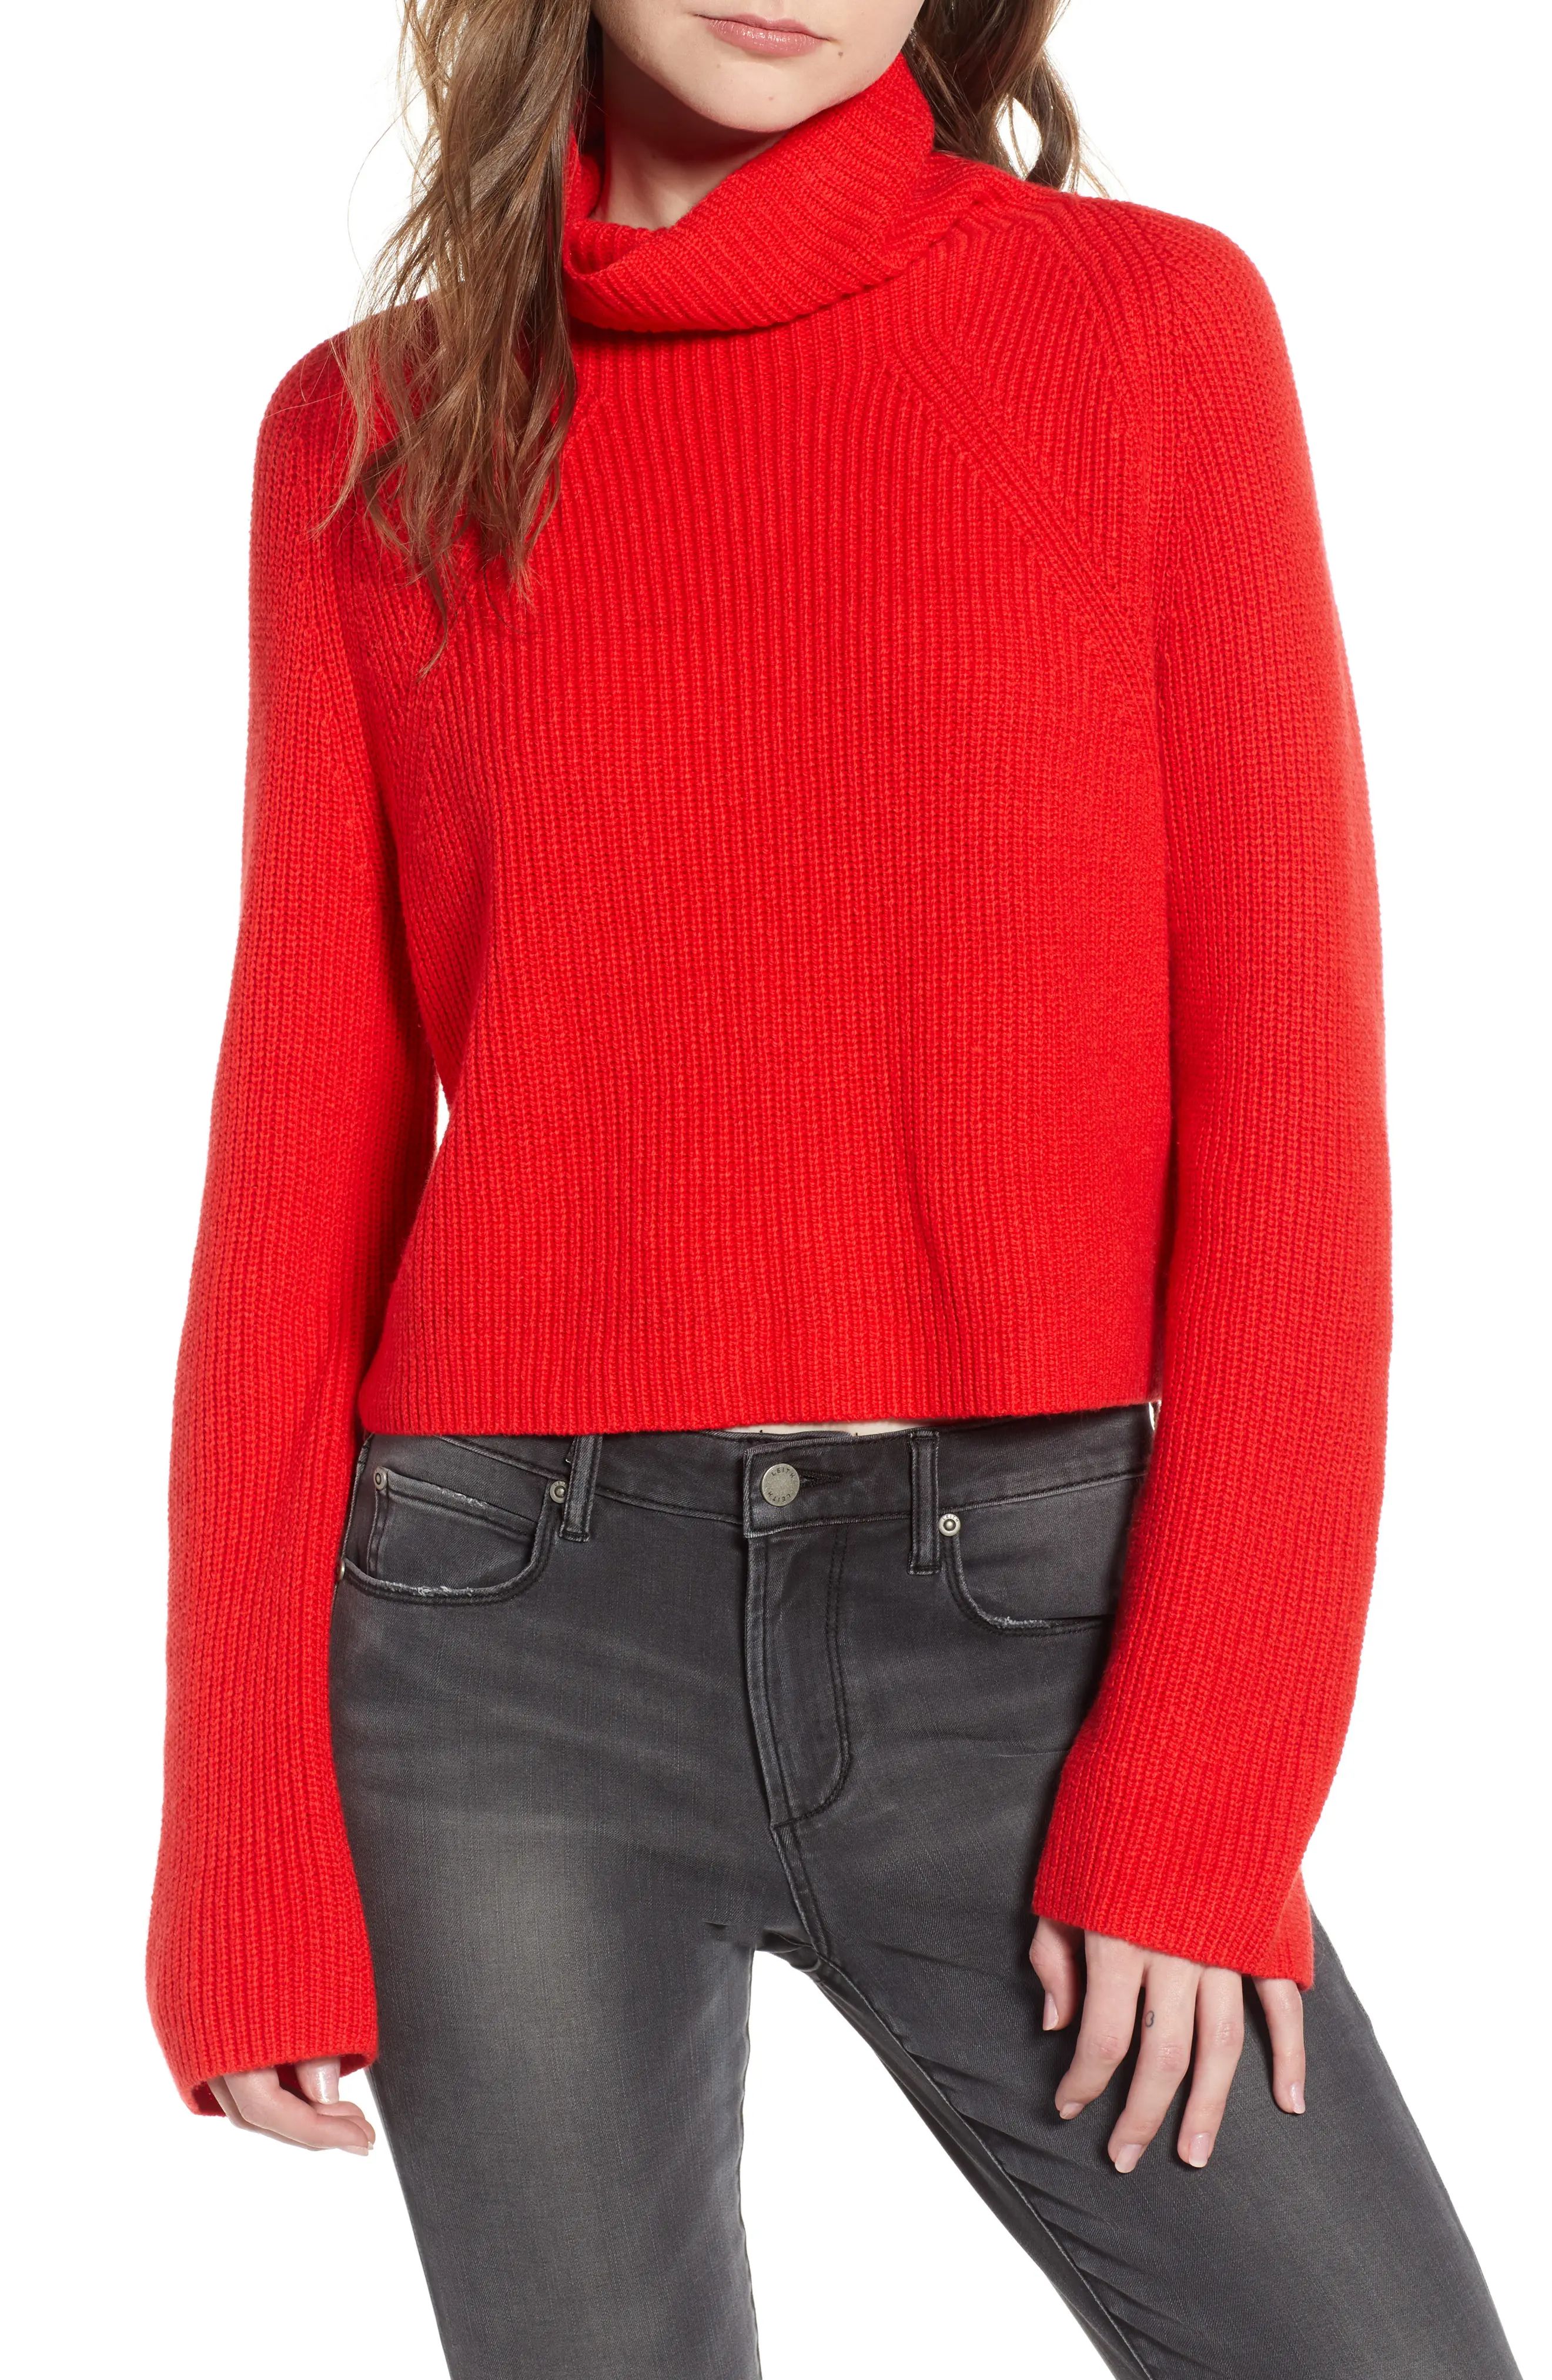 Women's Leith Transfer Stitch Turtleneck Sweater, Size XX-Small - Red | Nordstrom